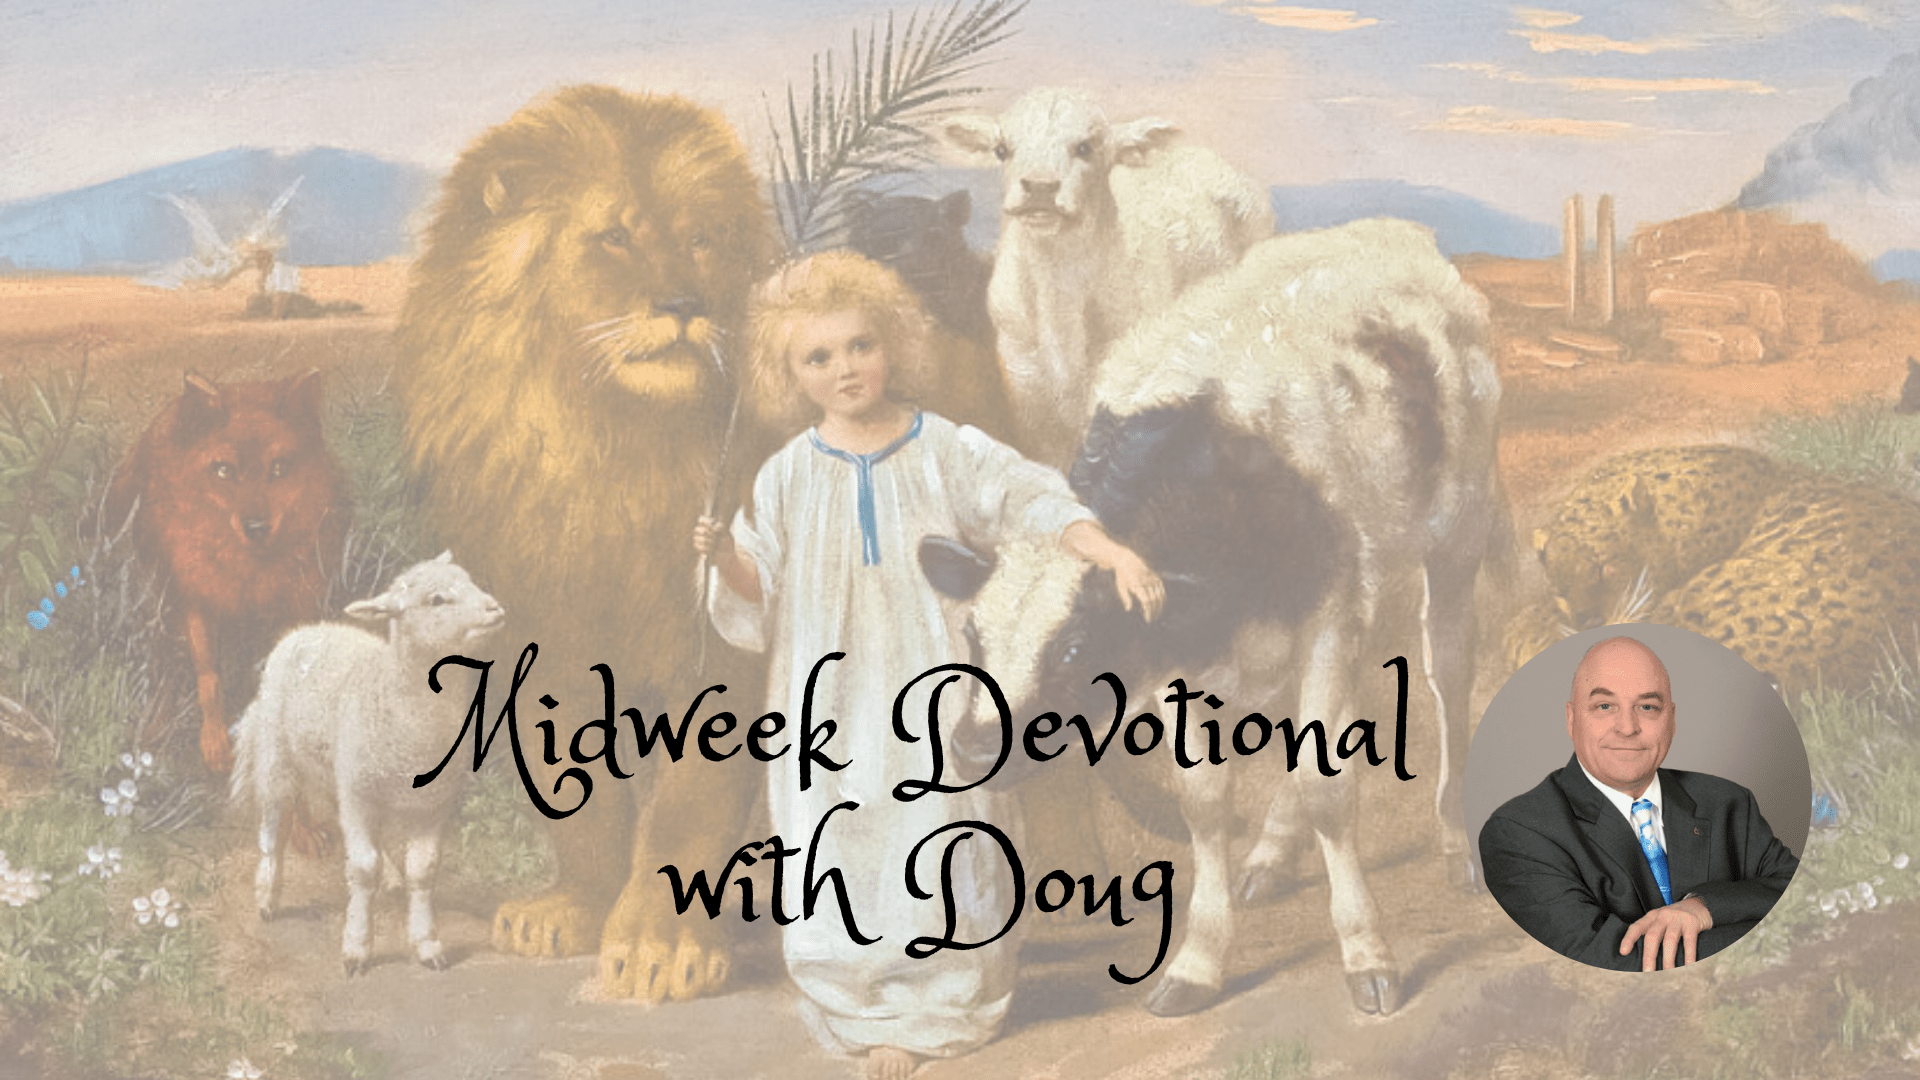 Midweek Devotional with Doug for first week of August